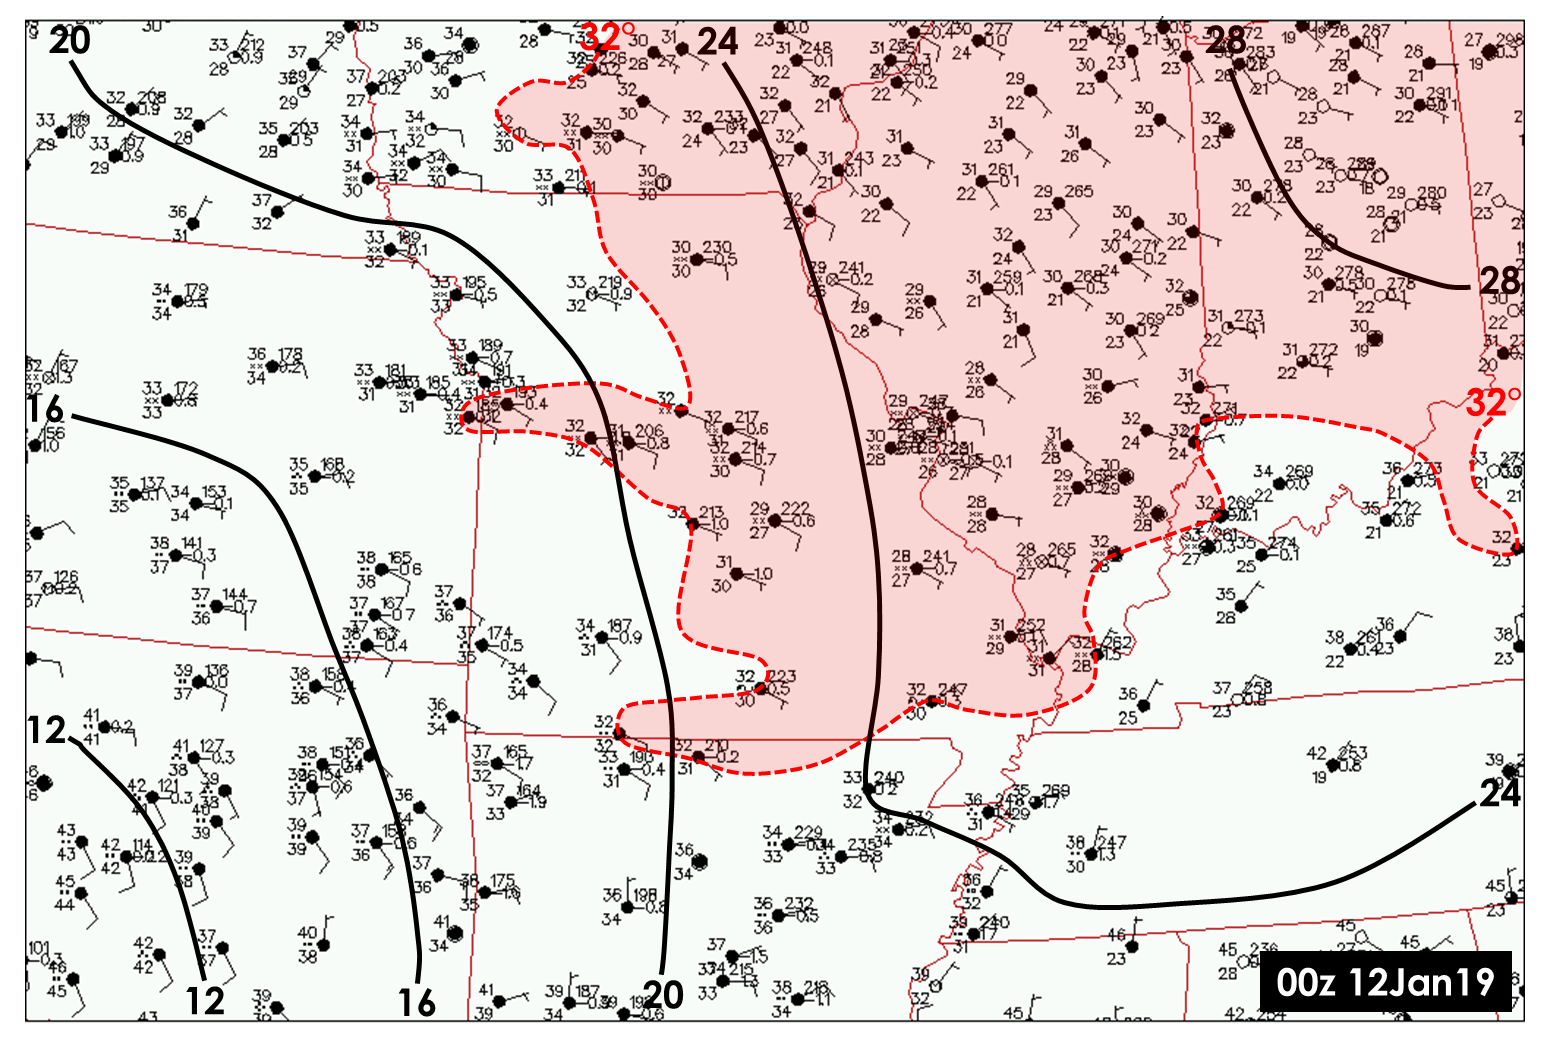 Surface map plot at 6PM (00z) on January 11, 2019.